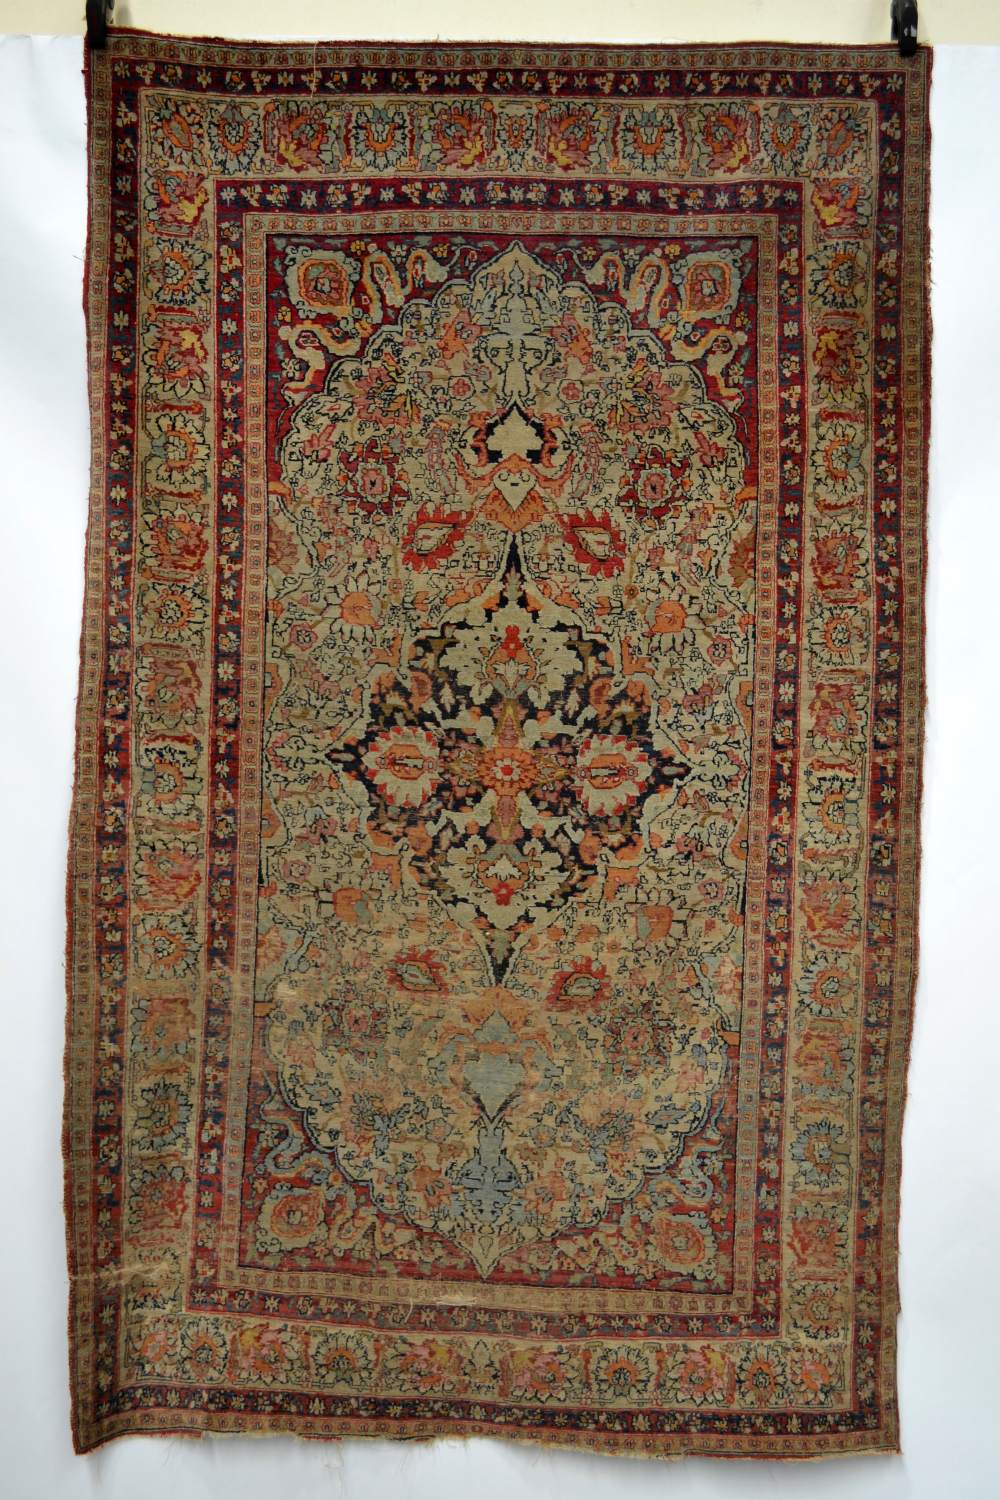 Esfahan rug, south west Persia, early 20th century, 6ft. 11in. x 4ft. 2in. 2.11m. x 1.27m. Overall